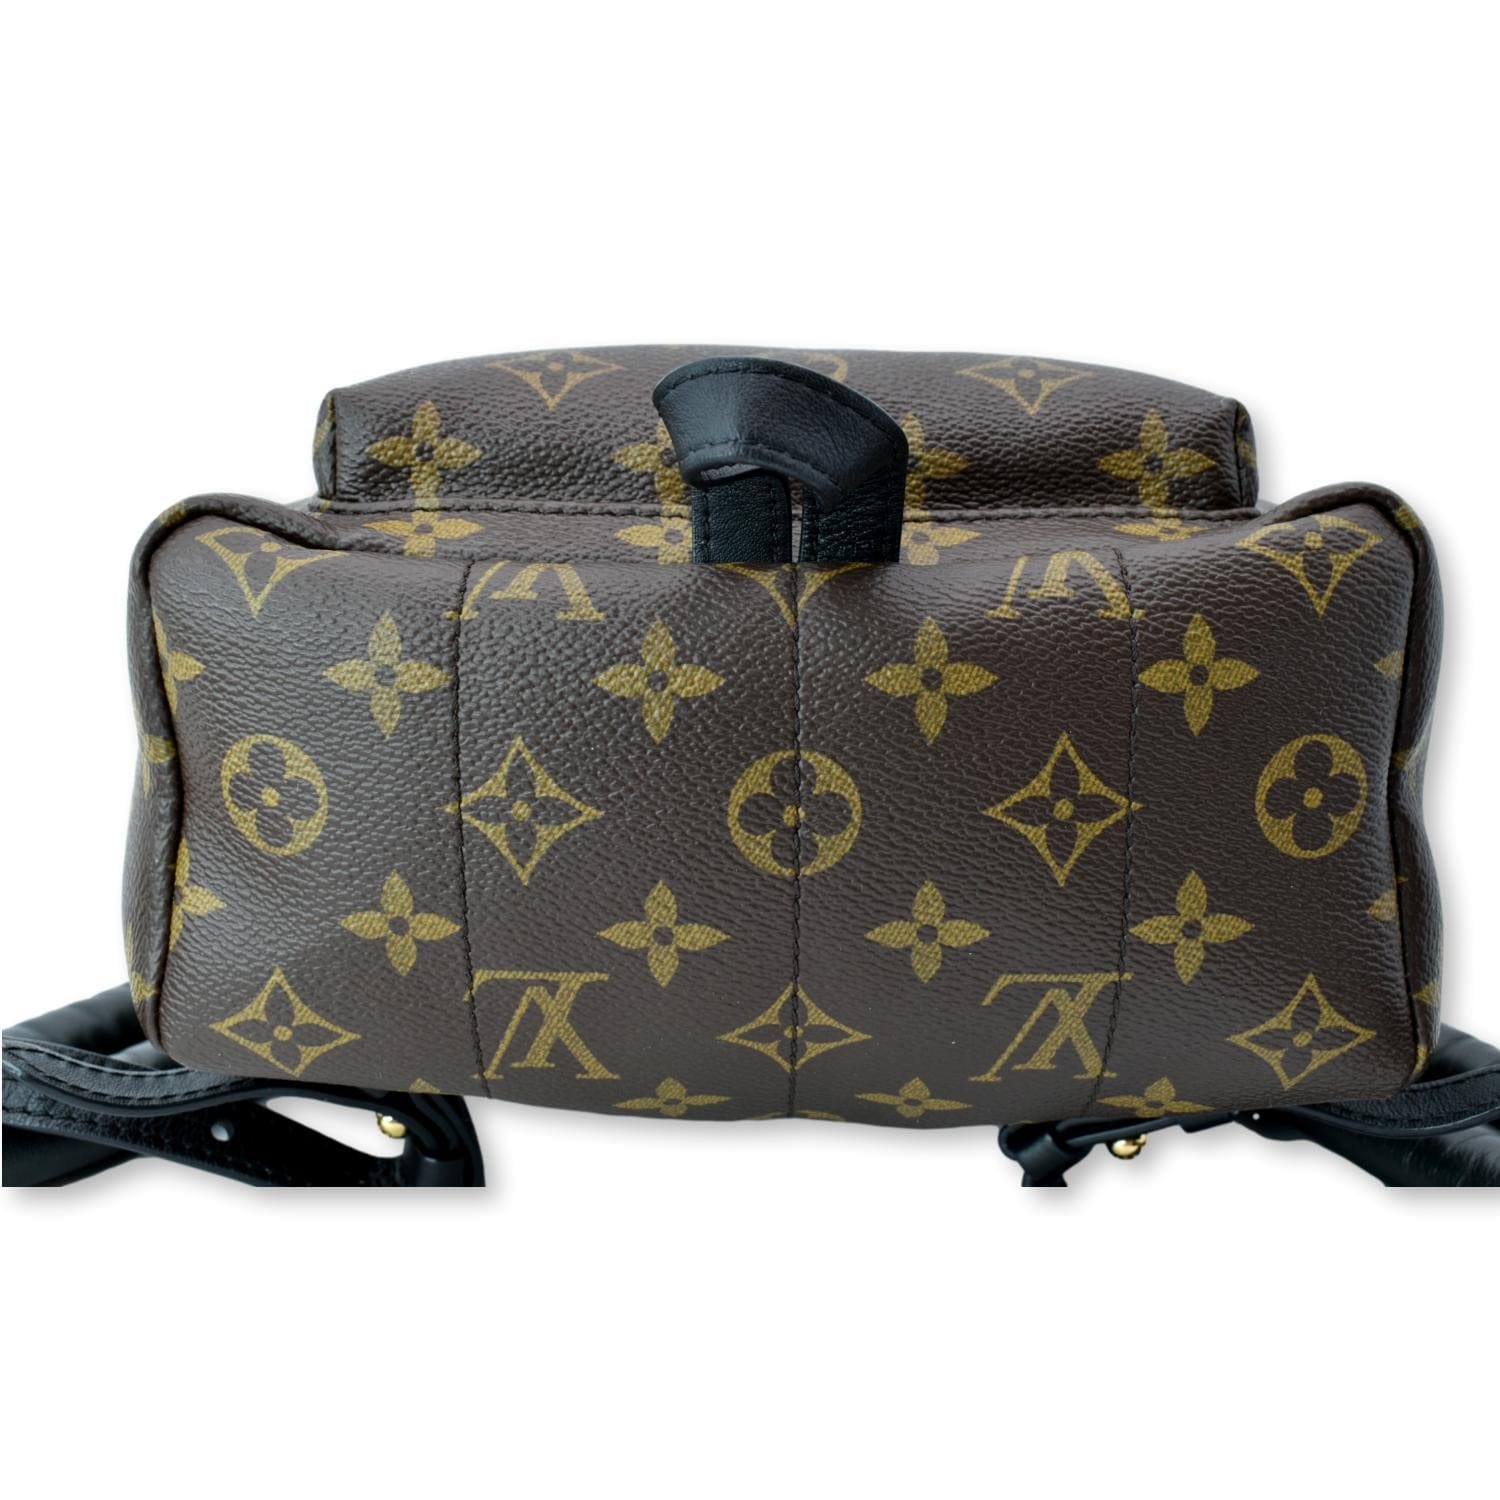 Louis Vuitton Palm Springs Backpack Bag Reference Guide - Spotted Fashion